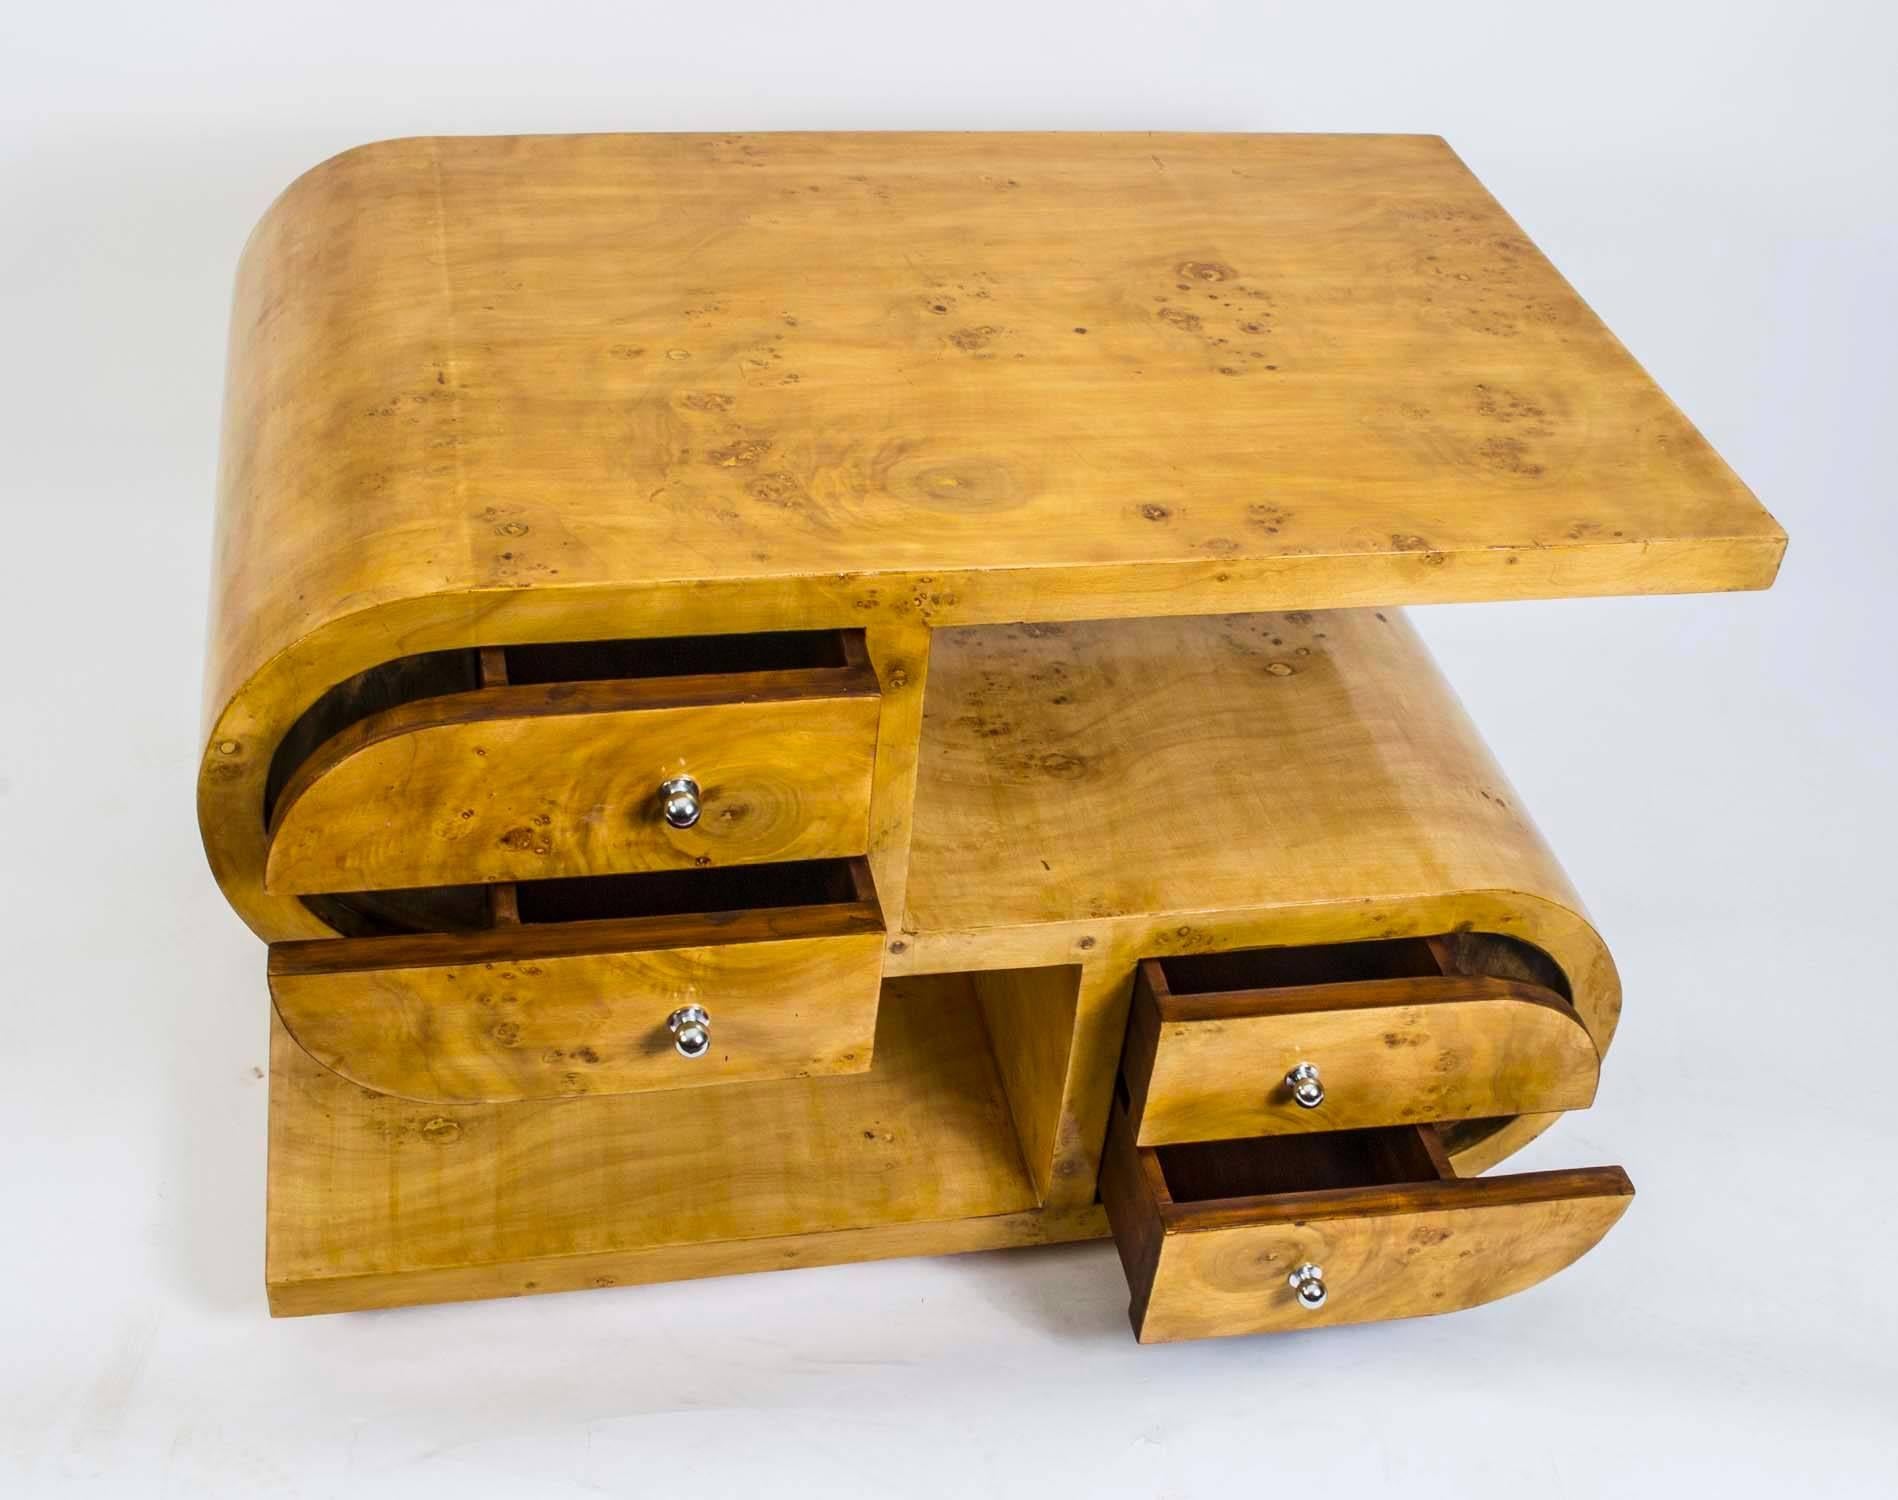 This is an unusual bird's-eye maple cabinet or side table in the fabulous Art Deco style from the last quarter of the 20th century.

This interesting piece is of unique 'S' shape form and features four unusually-shaped drawers on each side. The